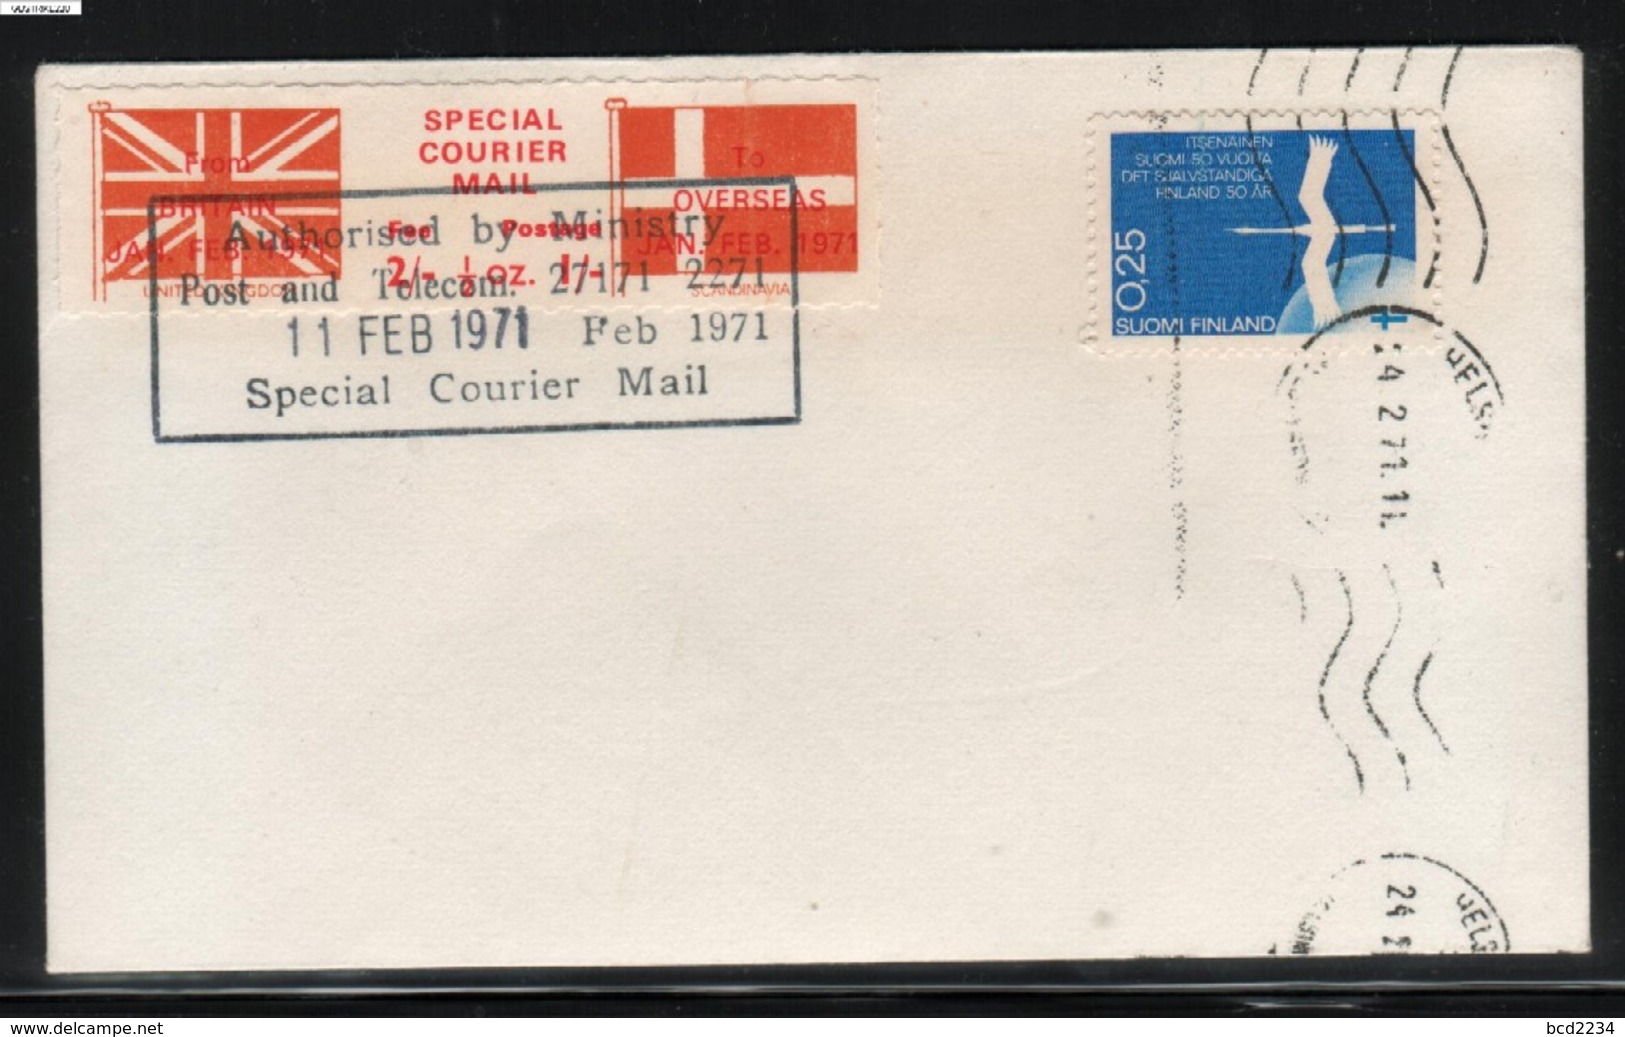 GREAT BRITAIN GB 1971 POSTAL STRIKE MAIL SPECIAL COURIER MAIL 1ST ISSUE PRE-DECIMAL COVER HELSINKI FINLAND 11 FEBRUARY - Variedades Y Curiosidades